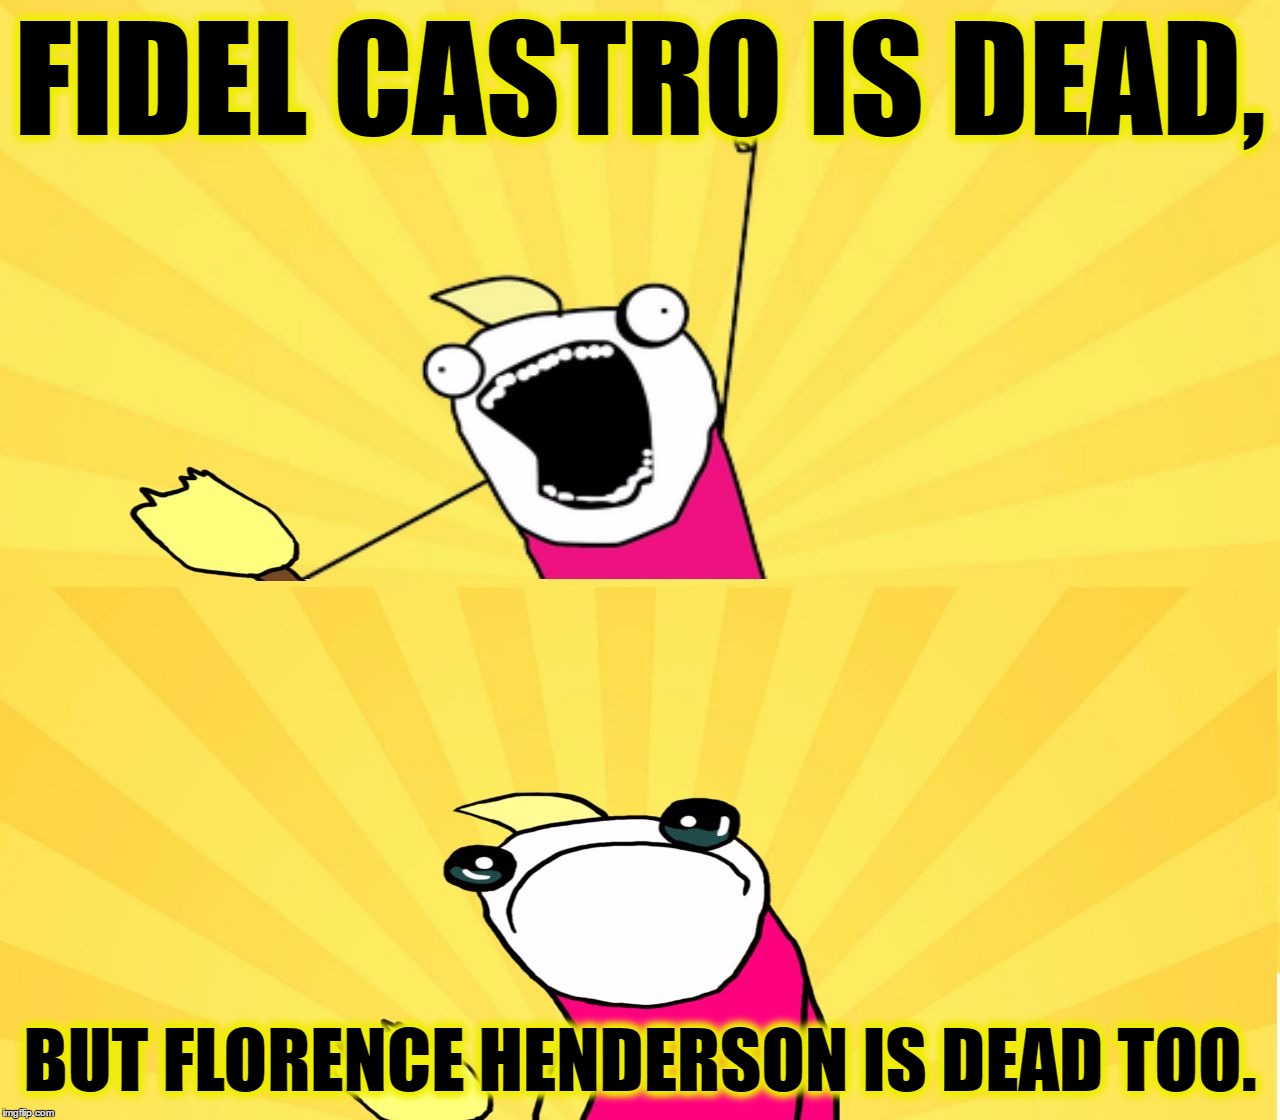 Share All The Good News And Bad News |  FIDEL CASTRO IS DEAD, BUT FLORENCE HENDERSON IS DEAD TOO. | image tagged in x all the y even bother,fidel castro,florence henderson,x all the y,funny,memes | made w/ Imgflip meme maker